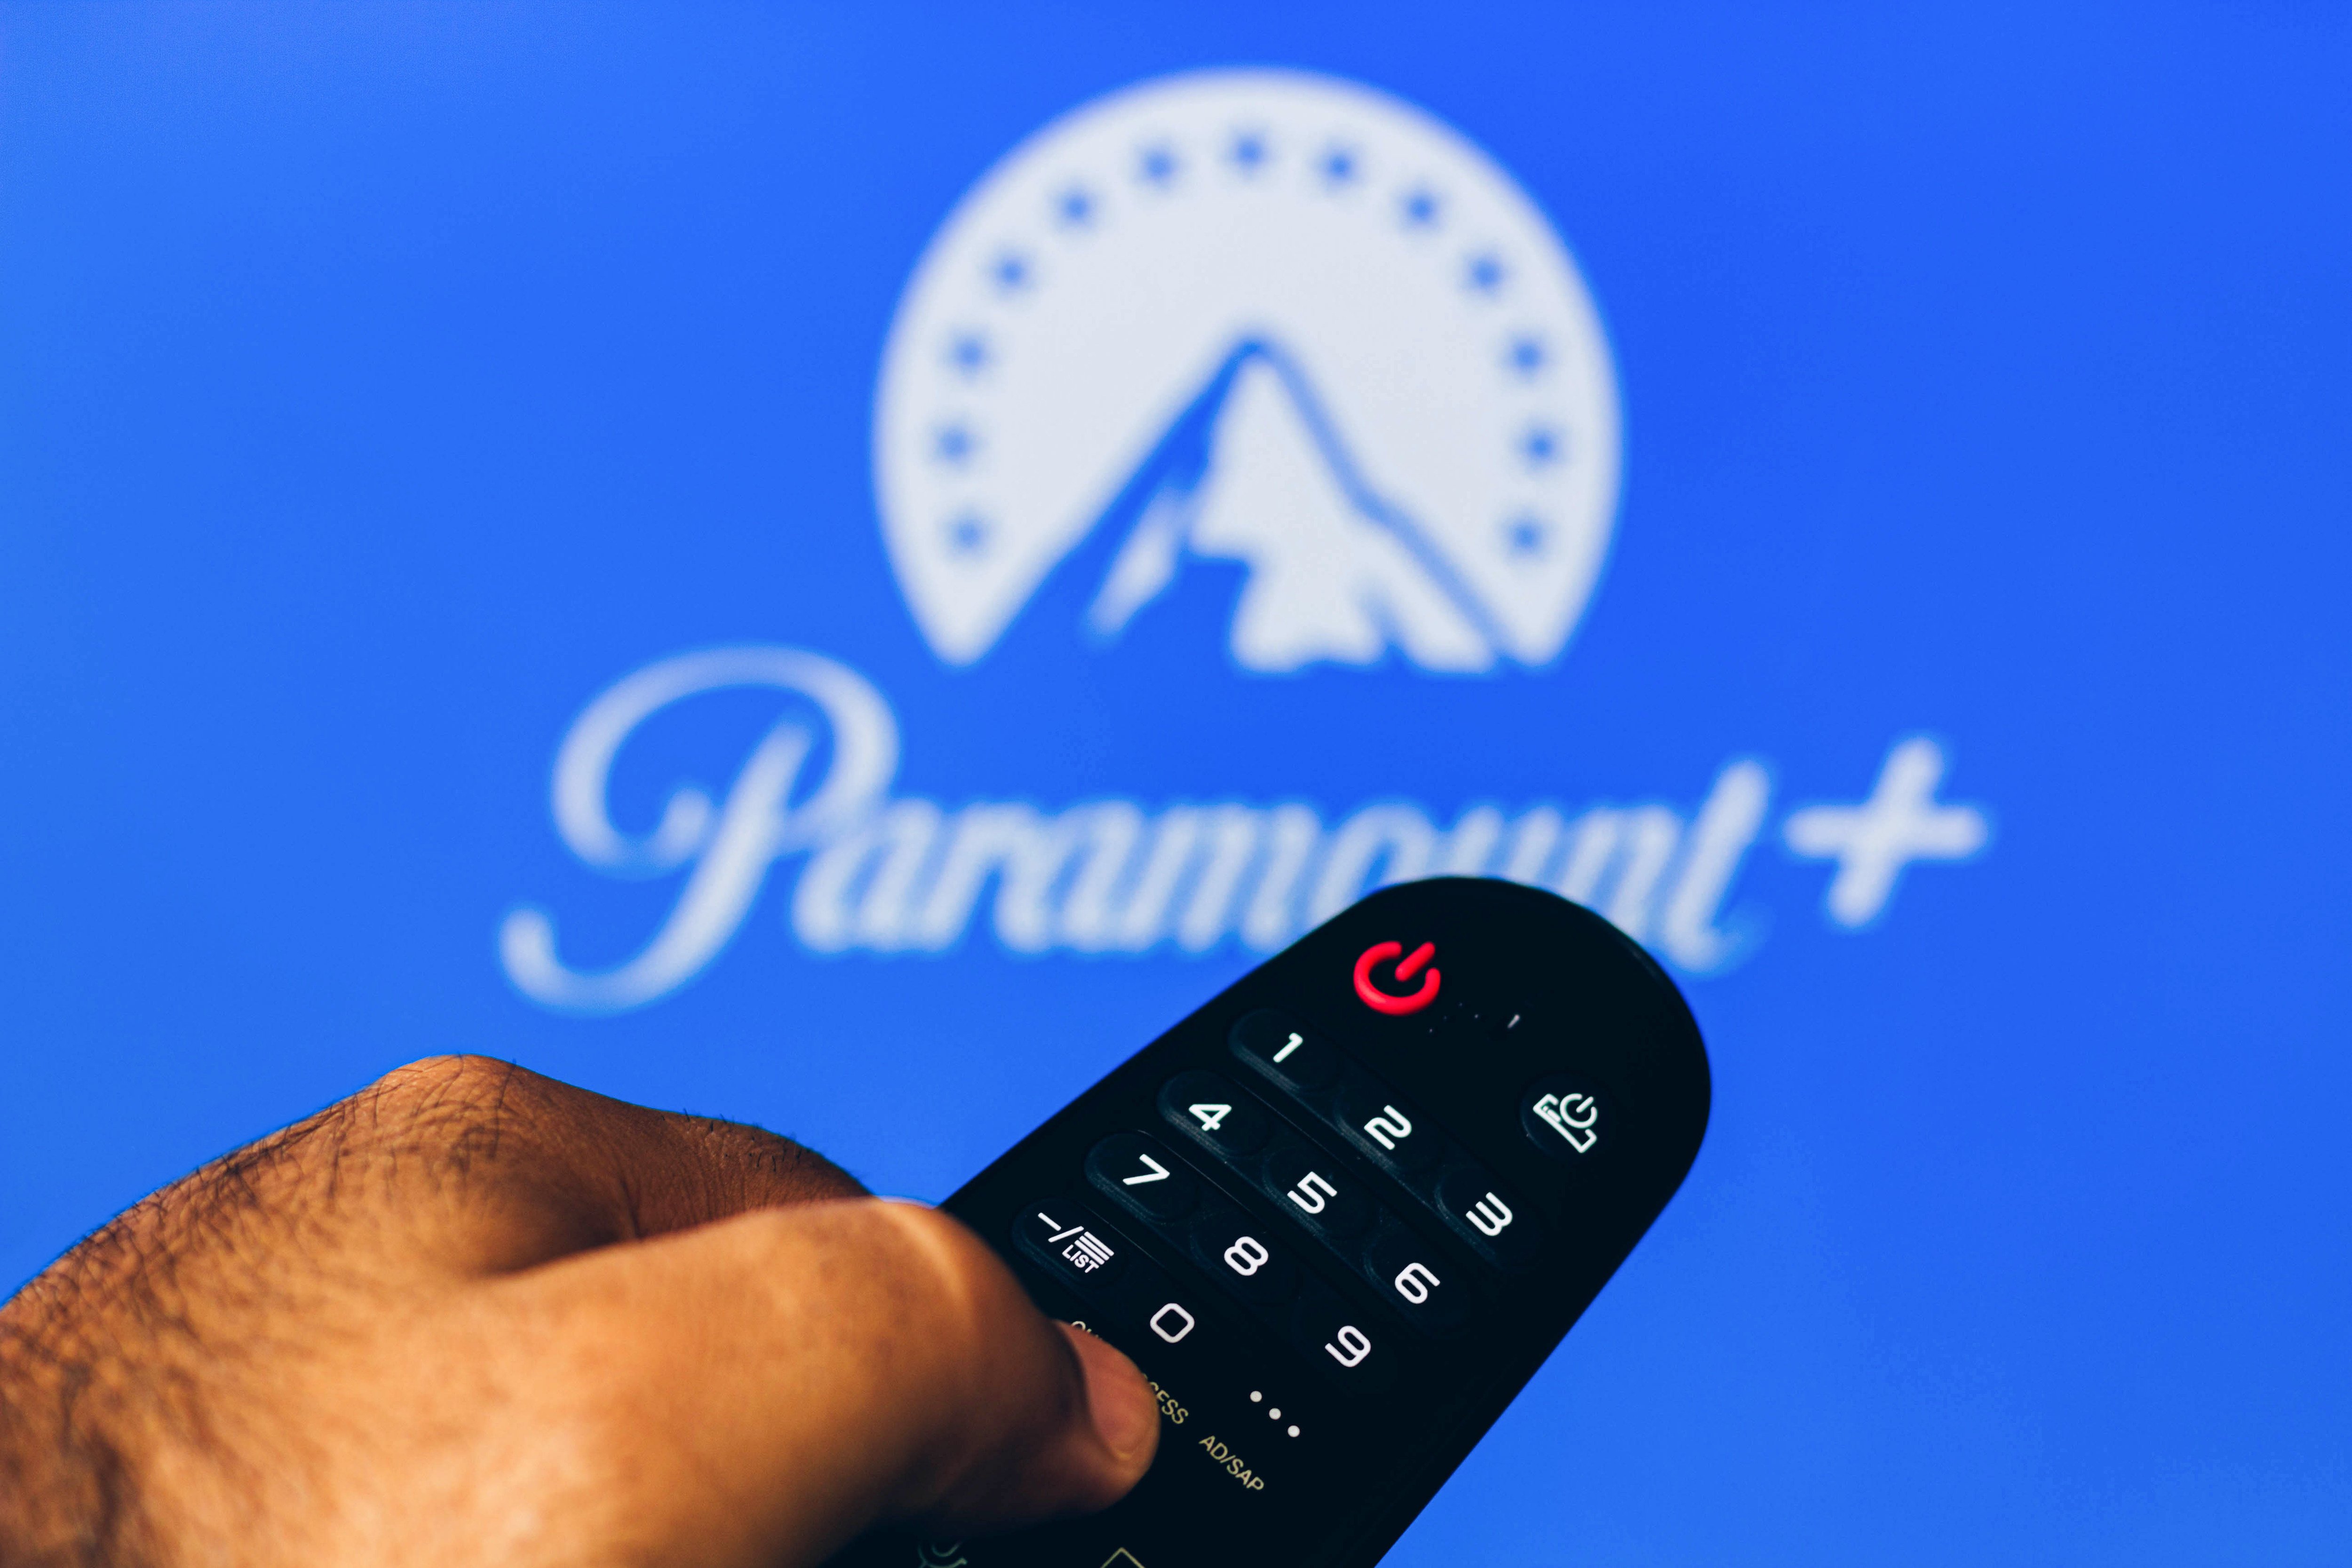 In this photo illustration, a hand holding a TV remote control points to a screen that displays the Paramount Plus logo